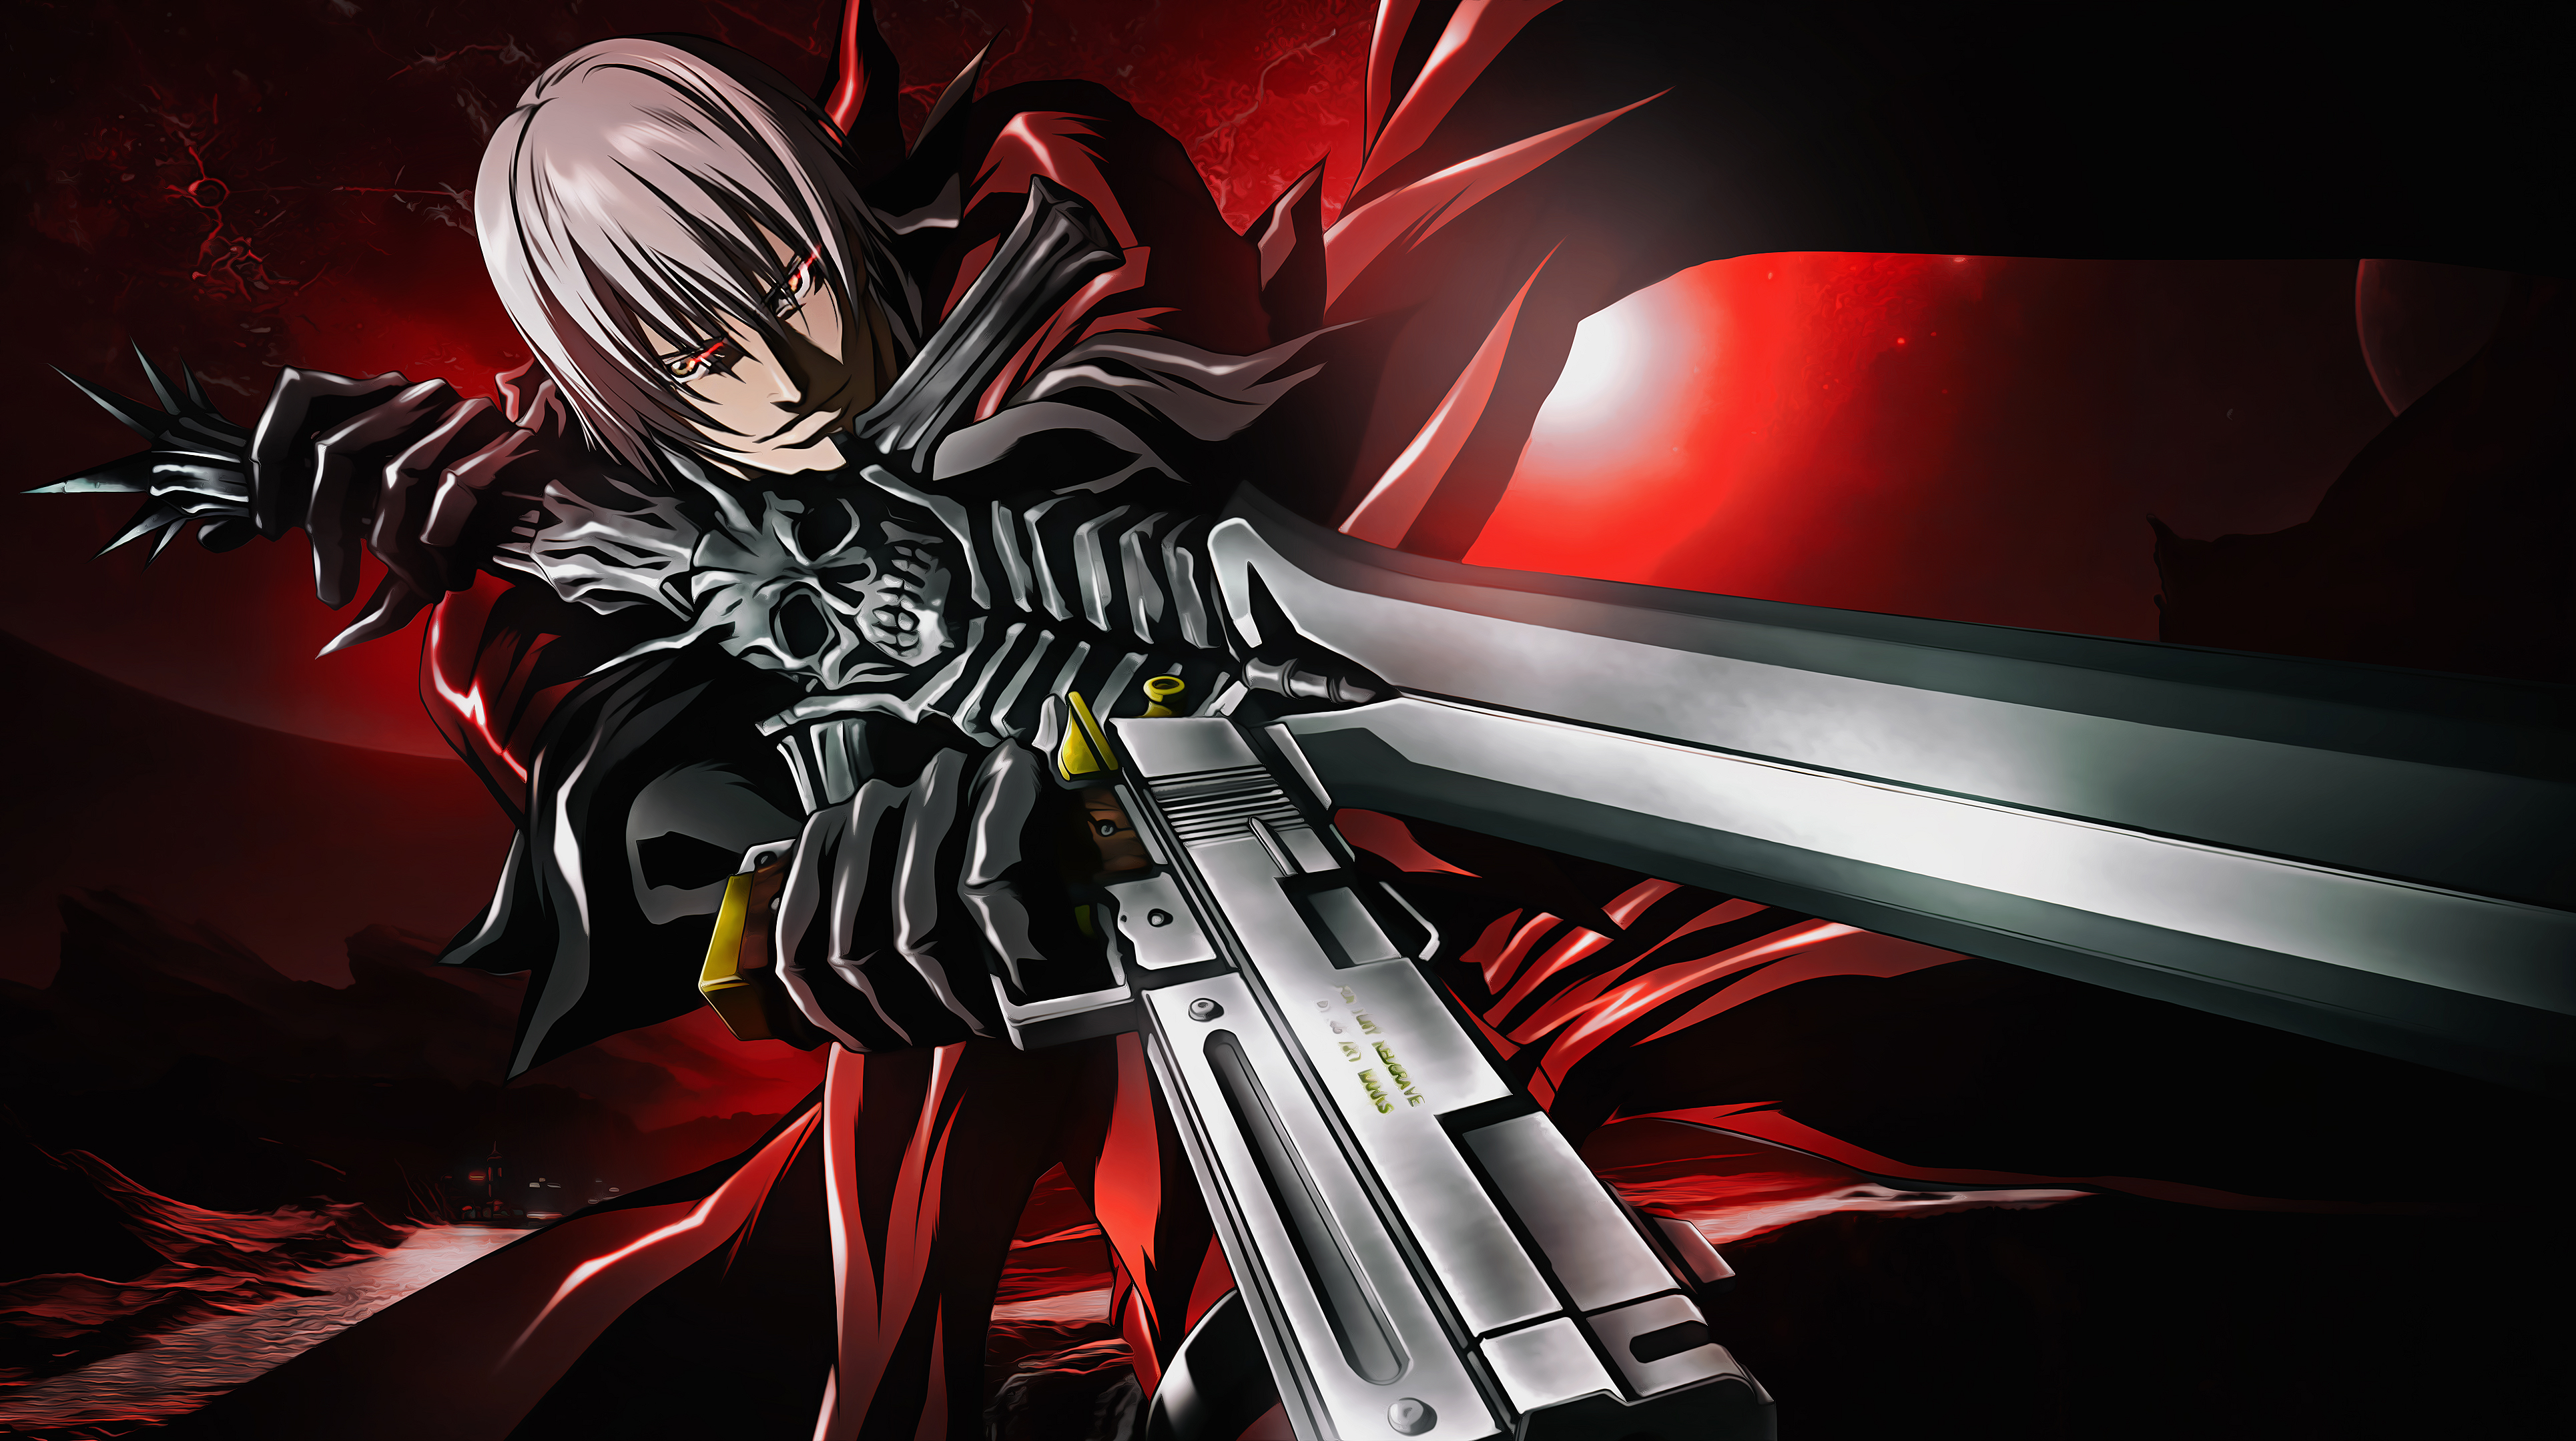 Devil May Cry Anime 4K Wallpaper by SyanArt